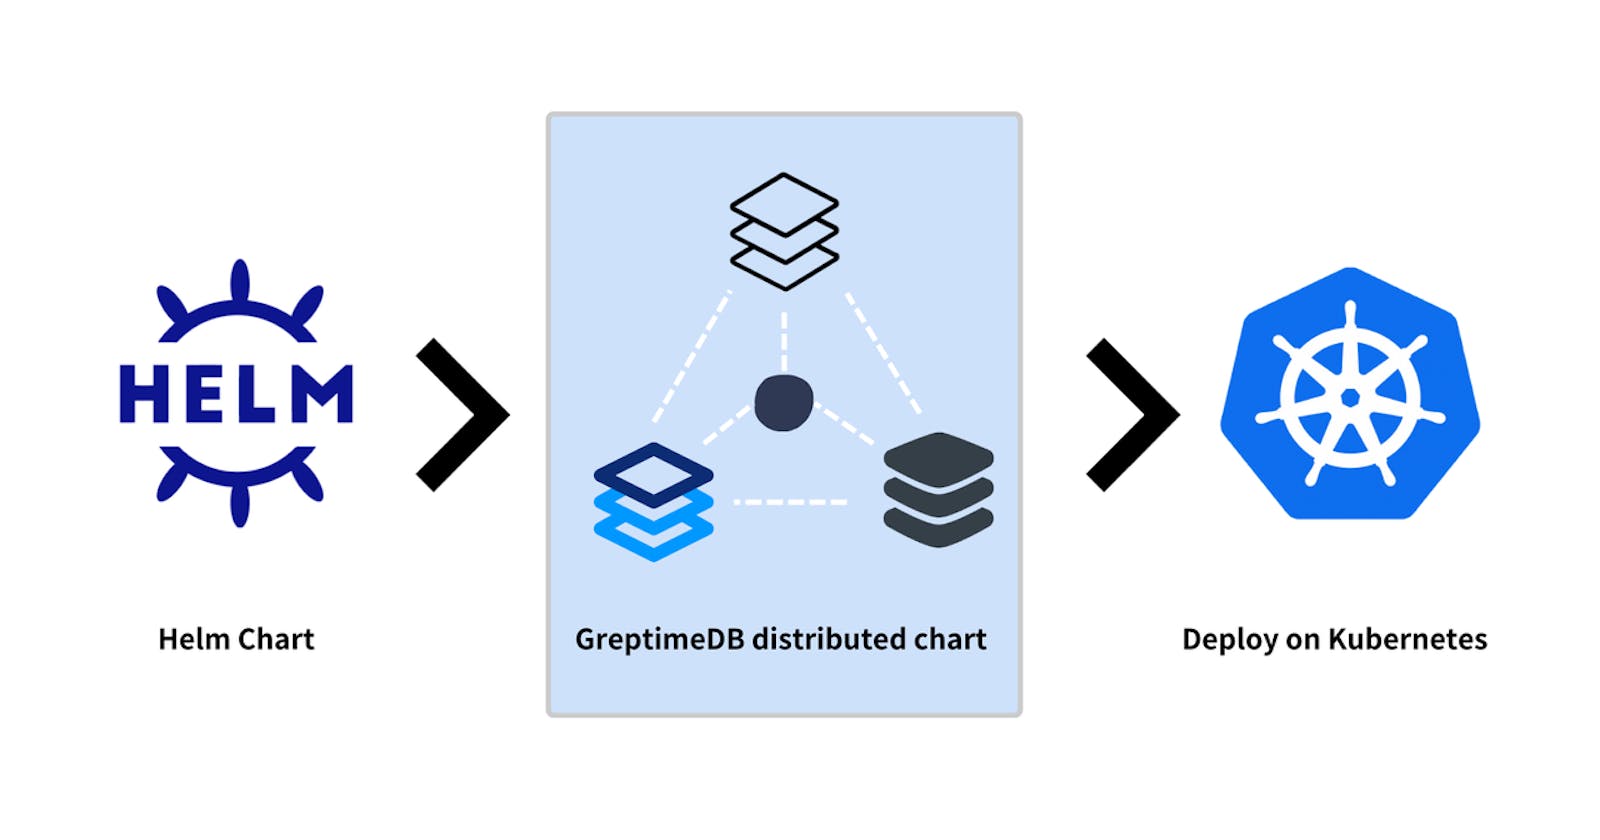 How to Use Helm Chart to Deploy Distributed GreptimeDB on Kubernetes